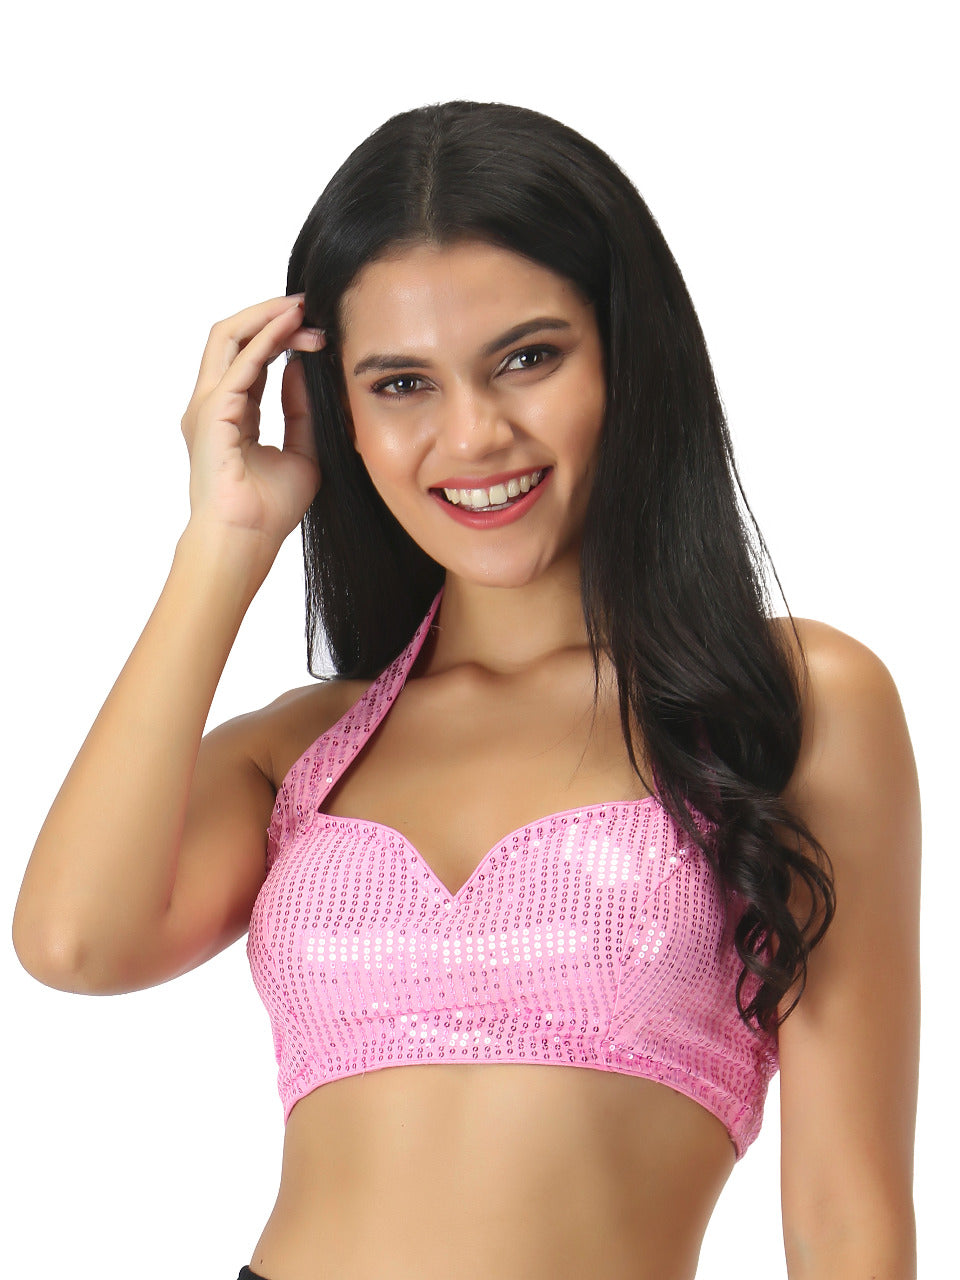 Saree Blouse Top in Shimmering Pink - Indian Clothing in Denver, CO, Aurora, CO, Boulder, CO, Fort Collins, CO, Colorado Springs, CO, Parker, CO, Highlands Ranch, CO, Cherry Creek, CO, Centennial, CO, and Longmont, CO. Nationwide shipping USA - India Fashion X